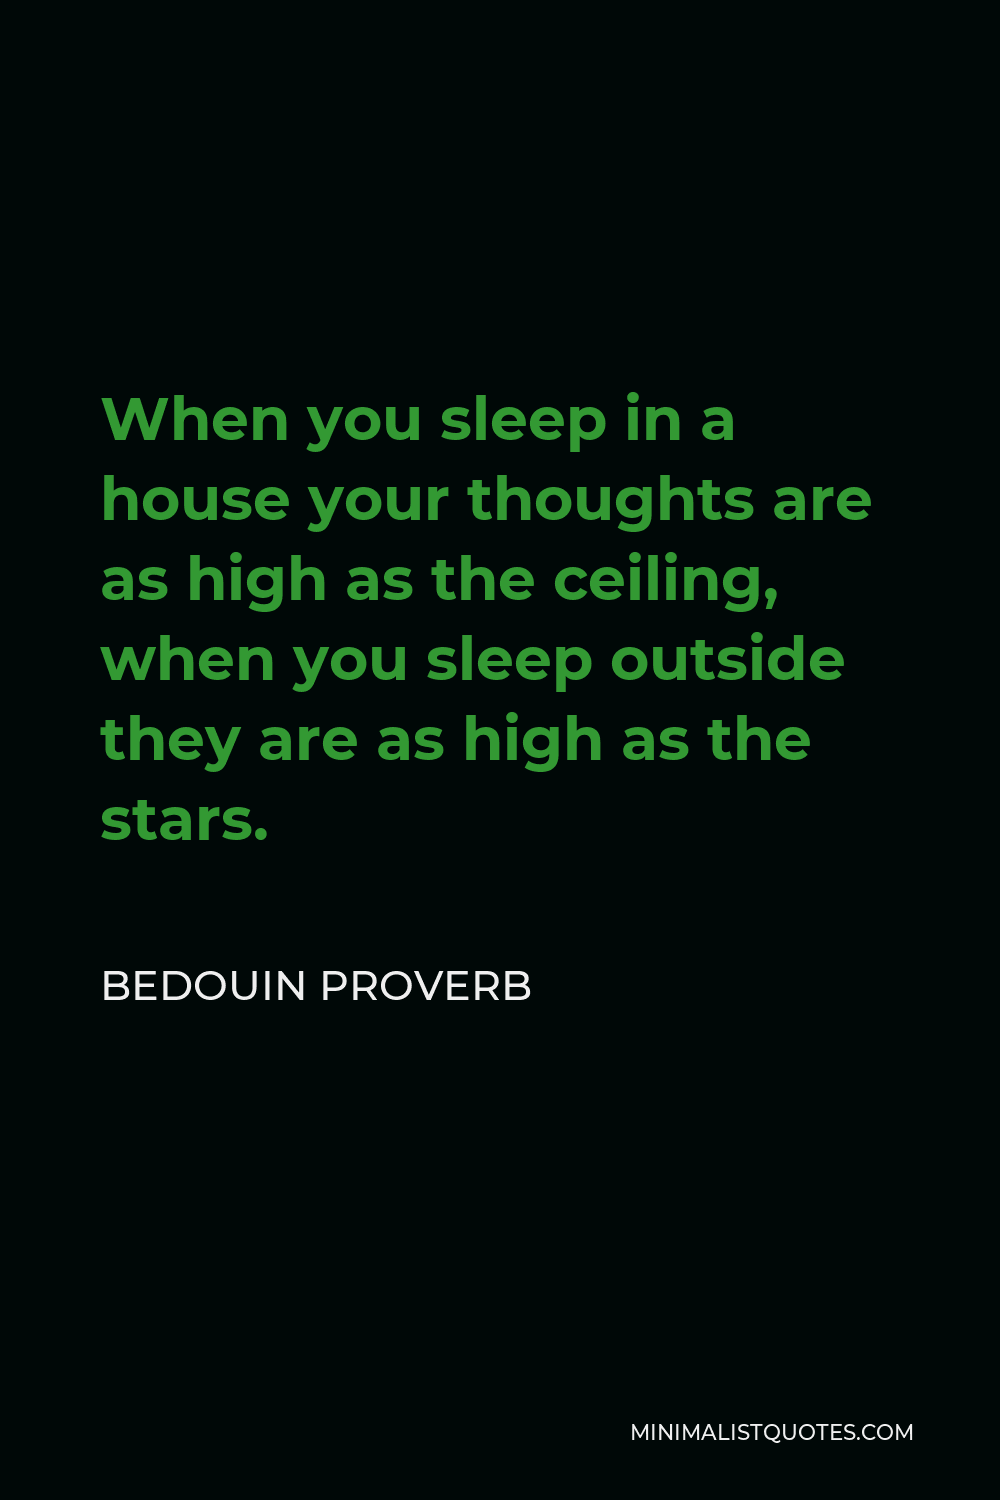 Bedouin Proverb Quote - When you sleep in a house your thoughts are as high as the ceiling, when you sleep outside they are as high as the stars.